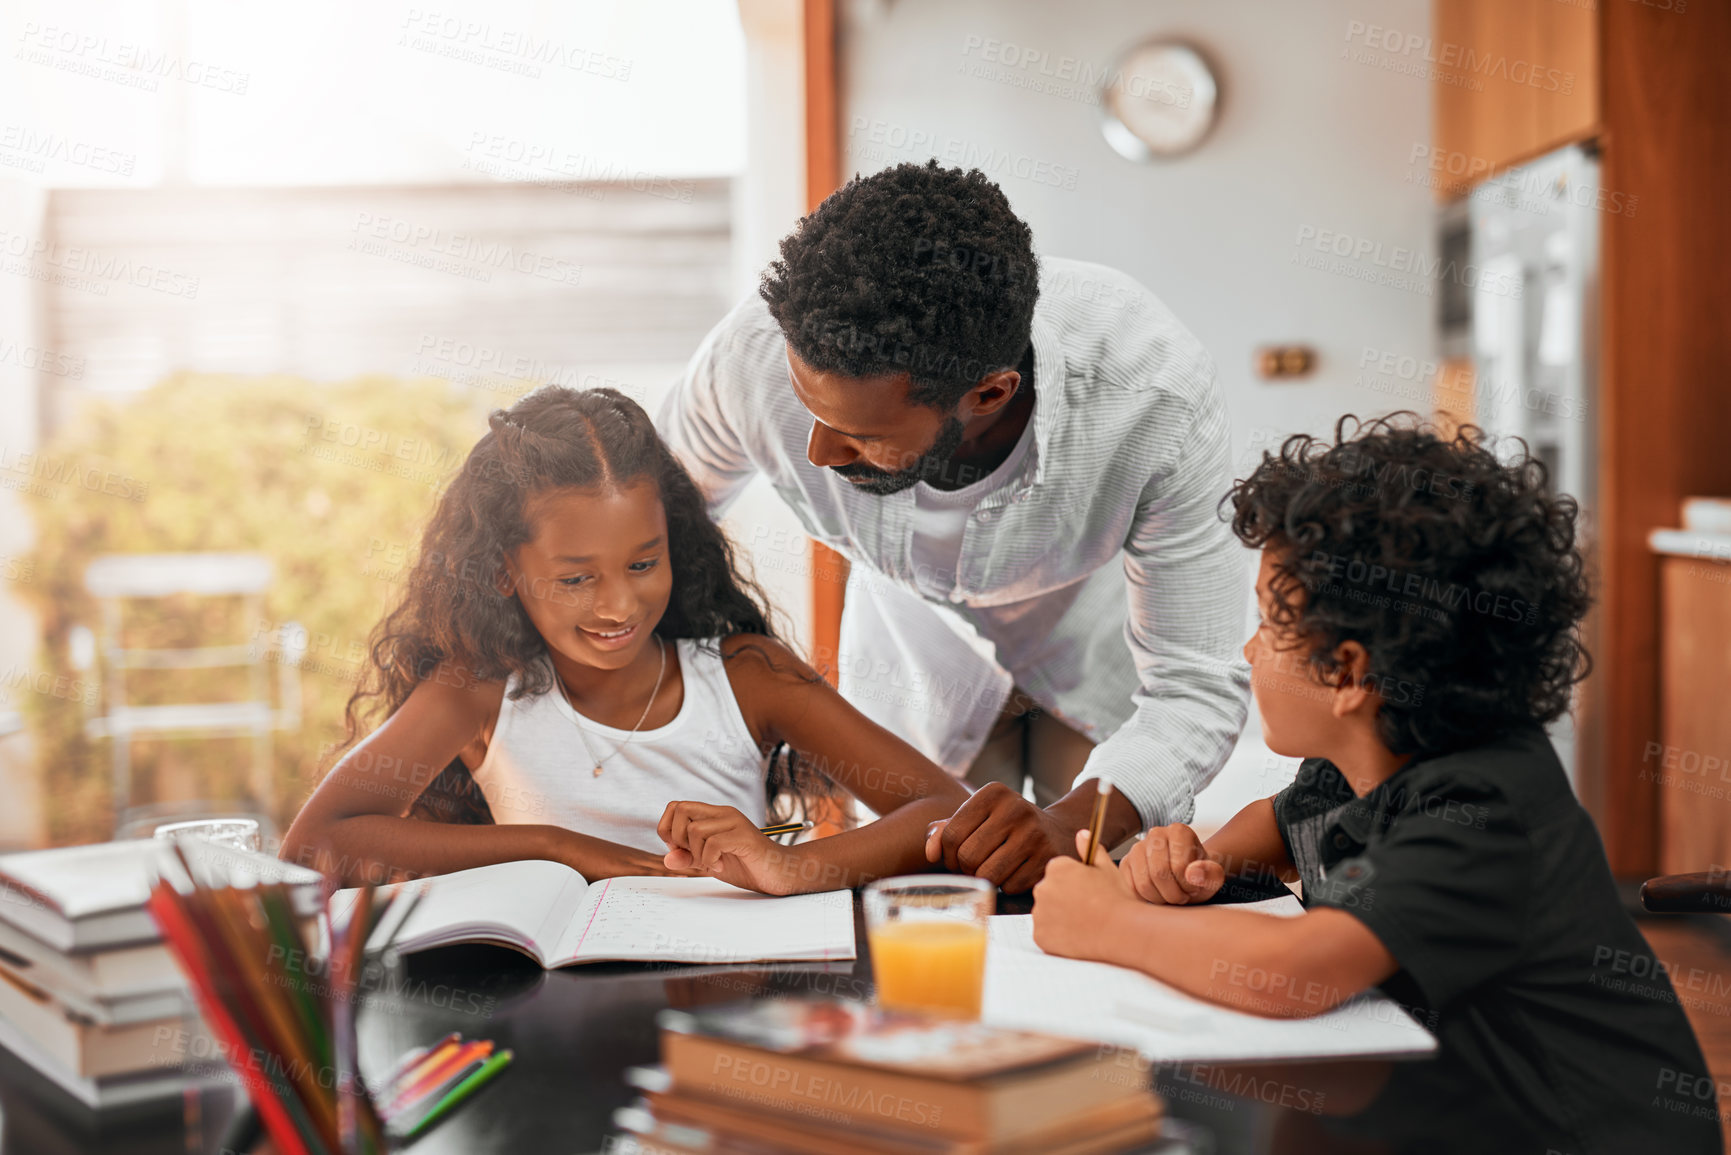 Buy stock photo Shot of a dad helping his children with their homework